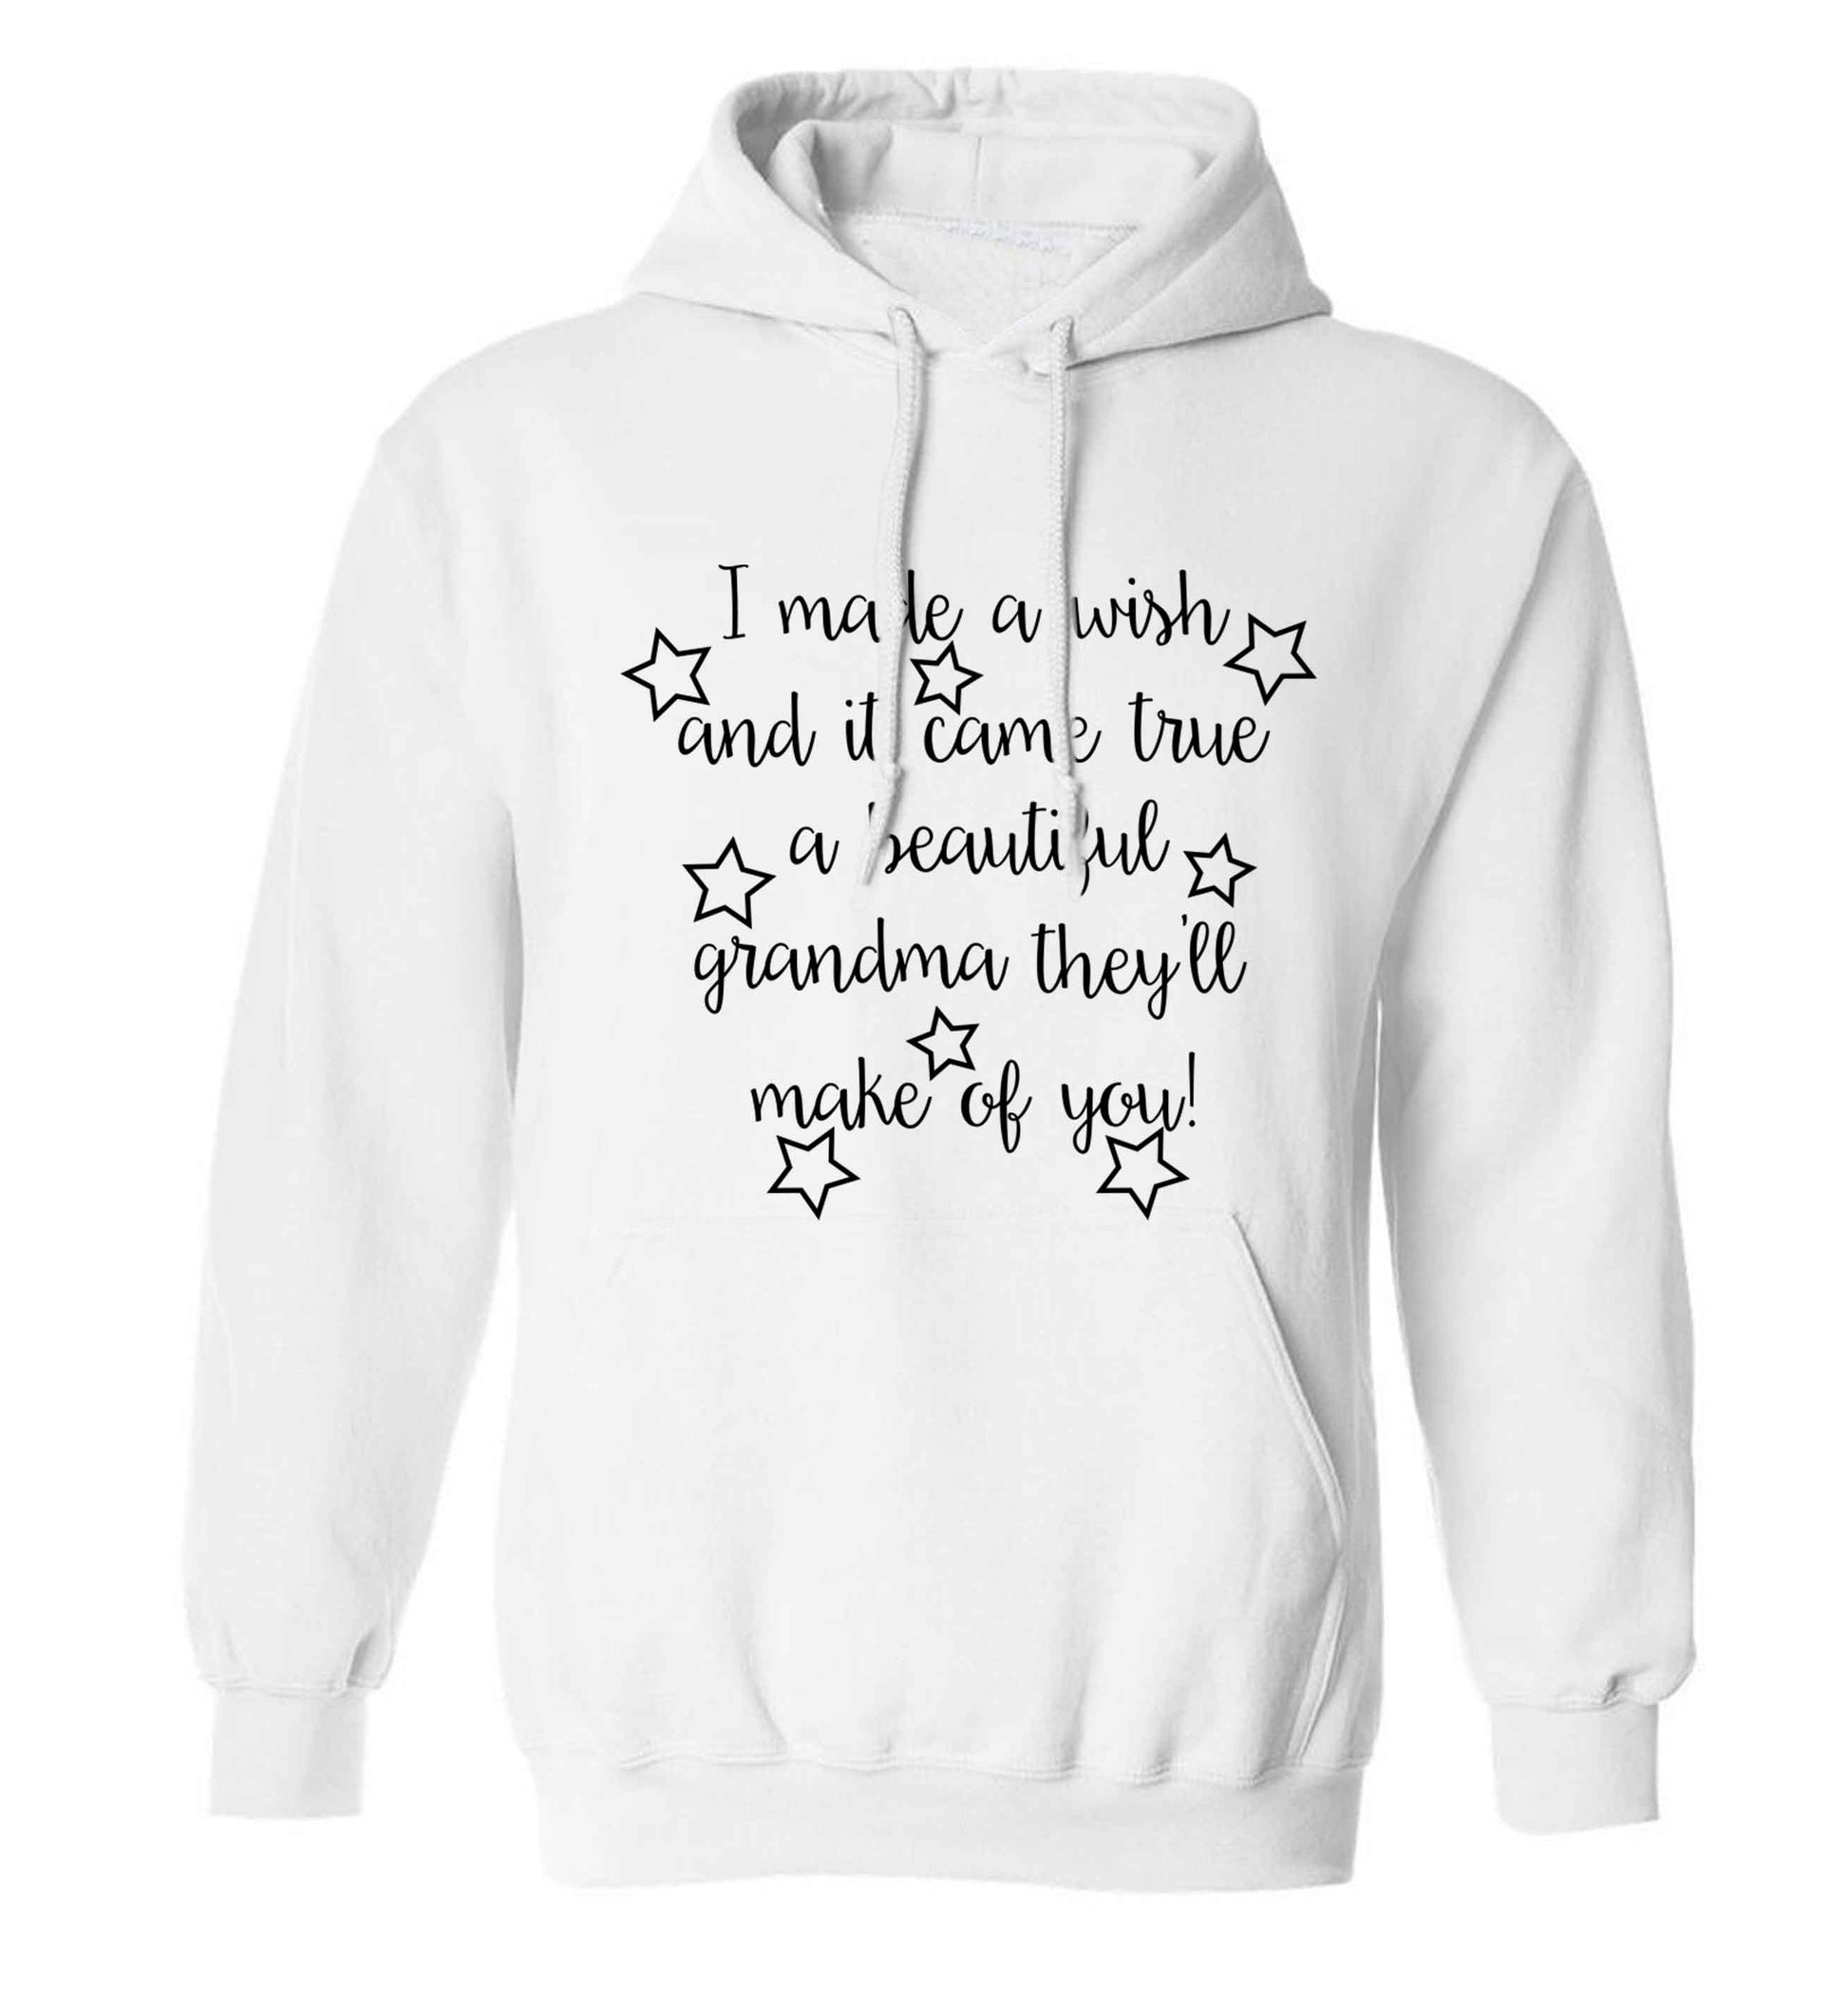 I made a wish and it came true a beautiful grandma they'll make of you! adults unisex white hoodie 2XL